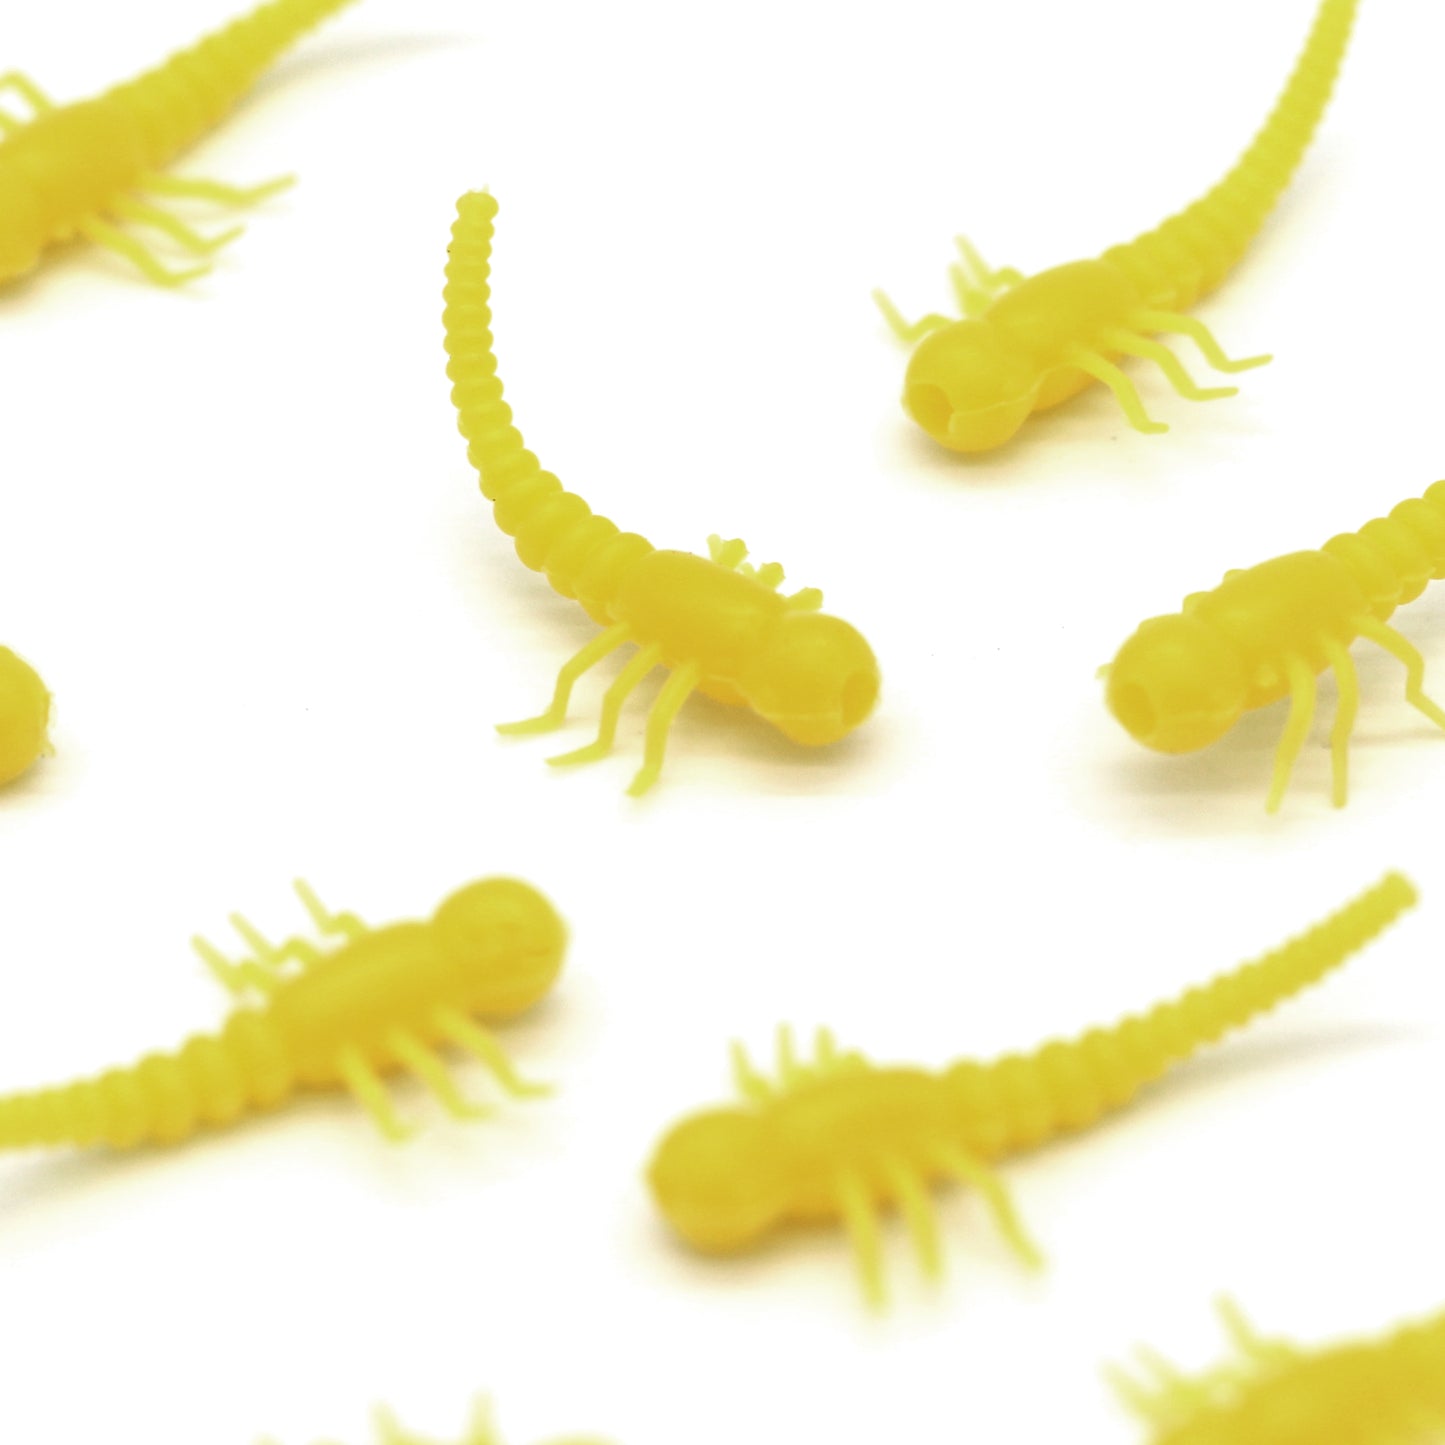 Deception Angling Worm Aligners for Fishing Pack of 10 in Yellow